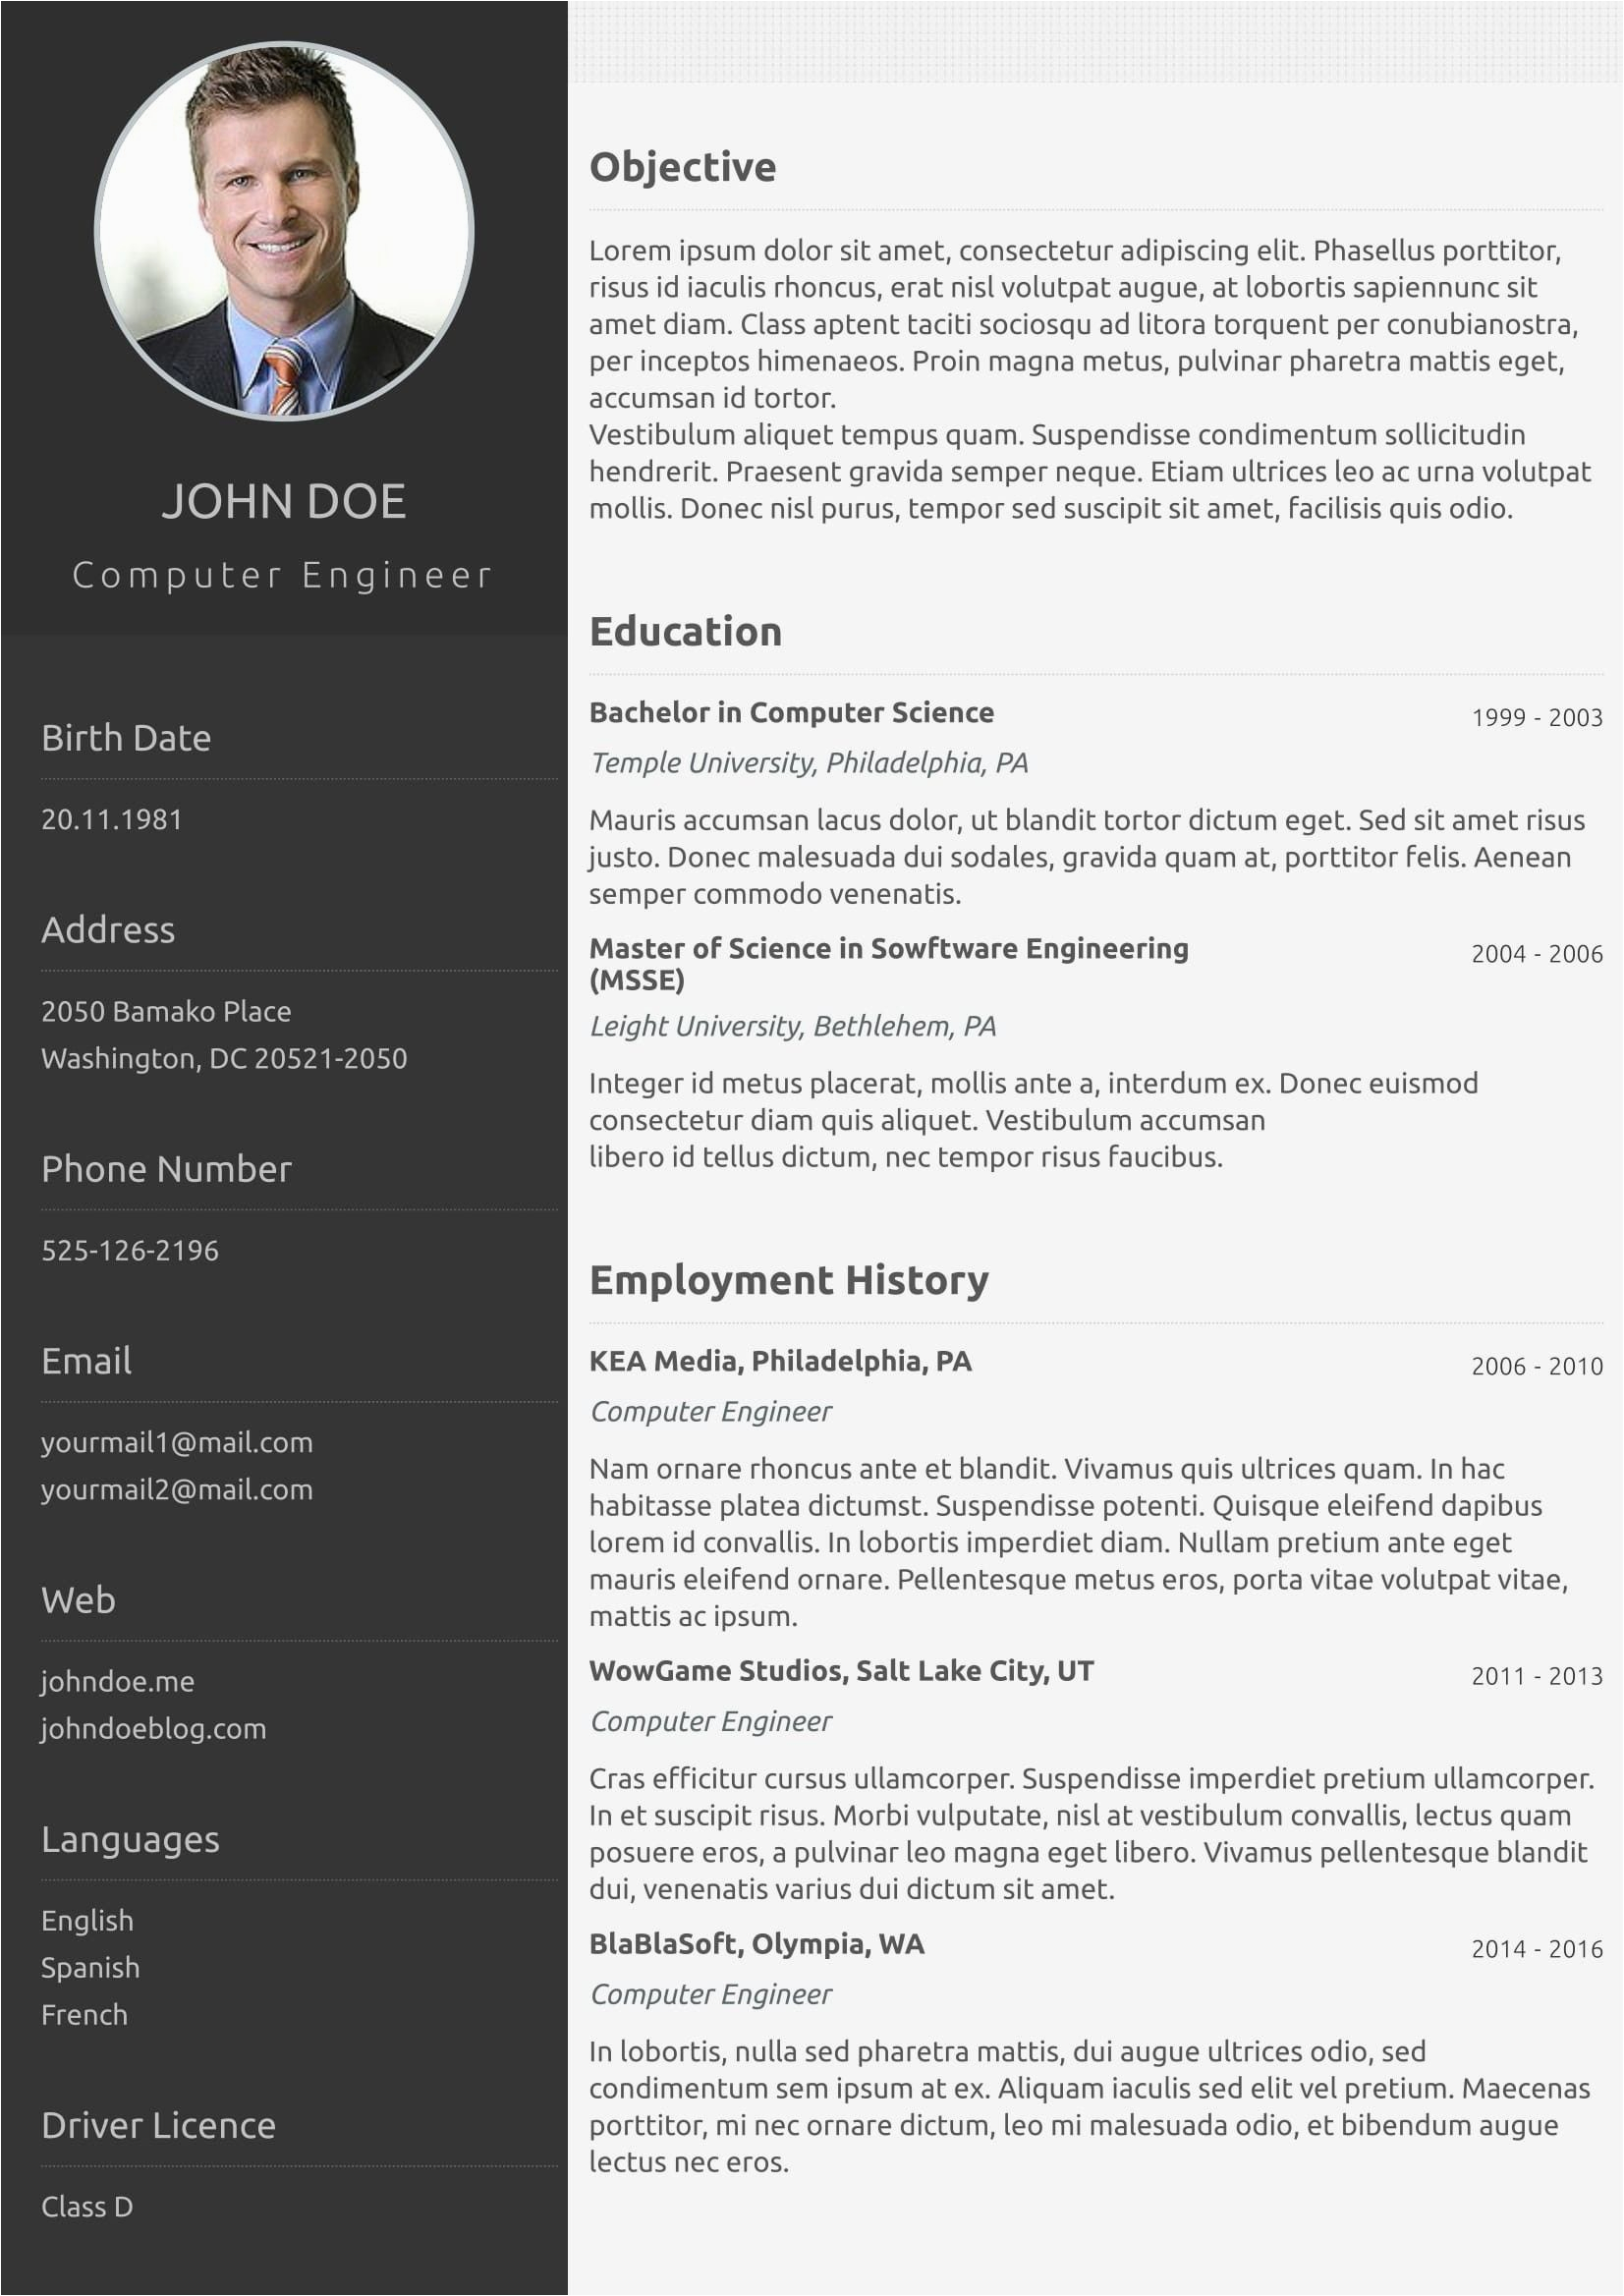 Resume and Cv Templates for Pages Does A Resume Have to Be E Page Best E Page Resume